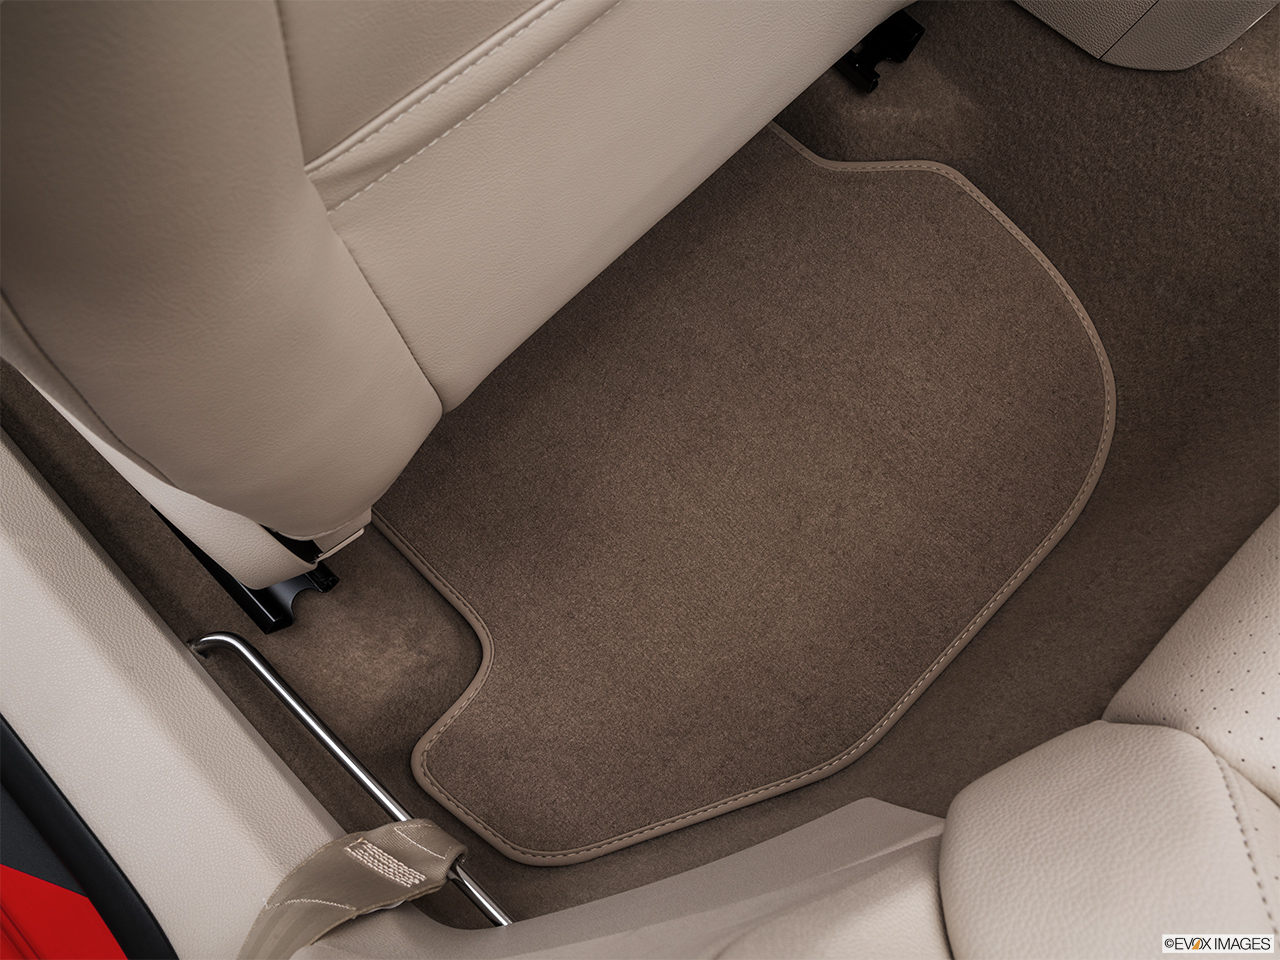 2016 Volkswagen Eos Komfort Edition Rear driver's side floor mat. Mid-seat level from outside looking in. 